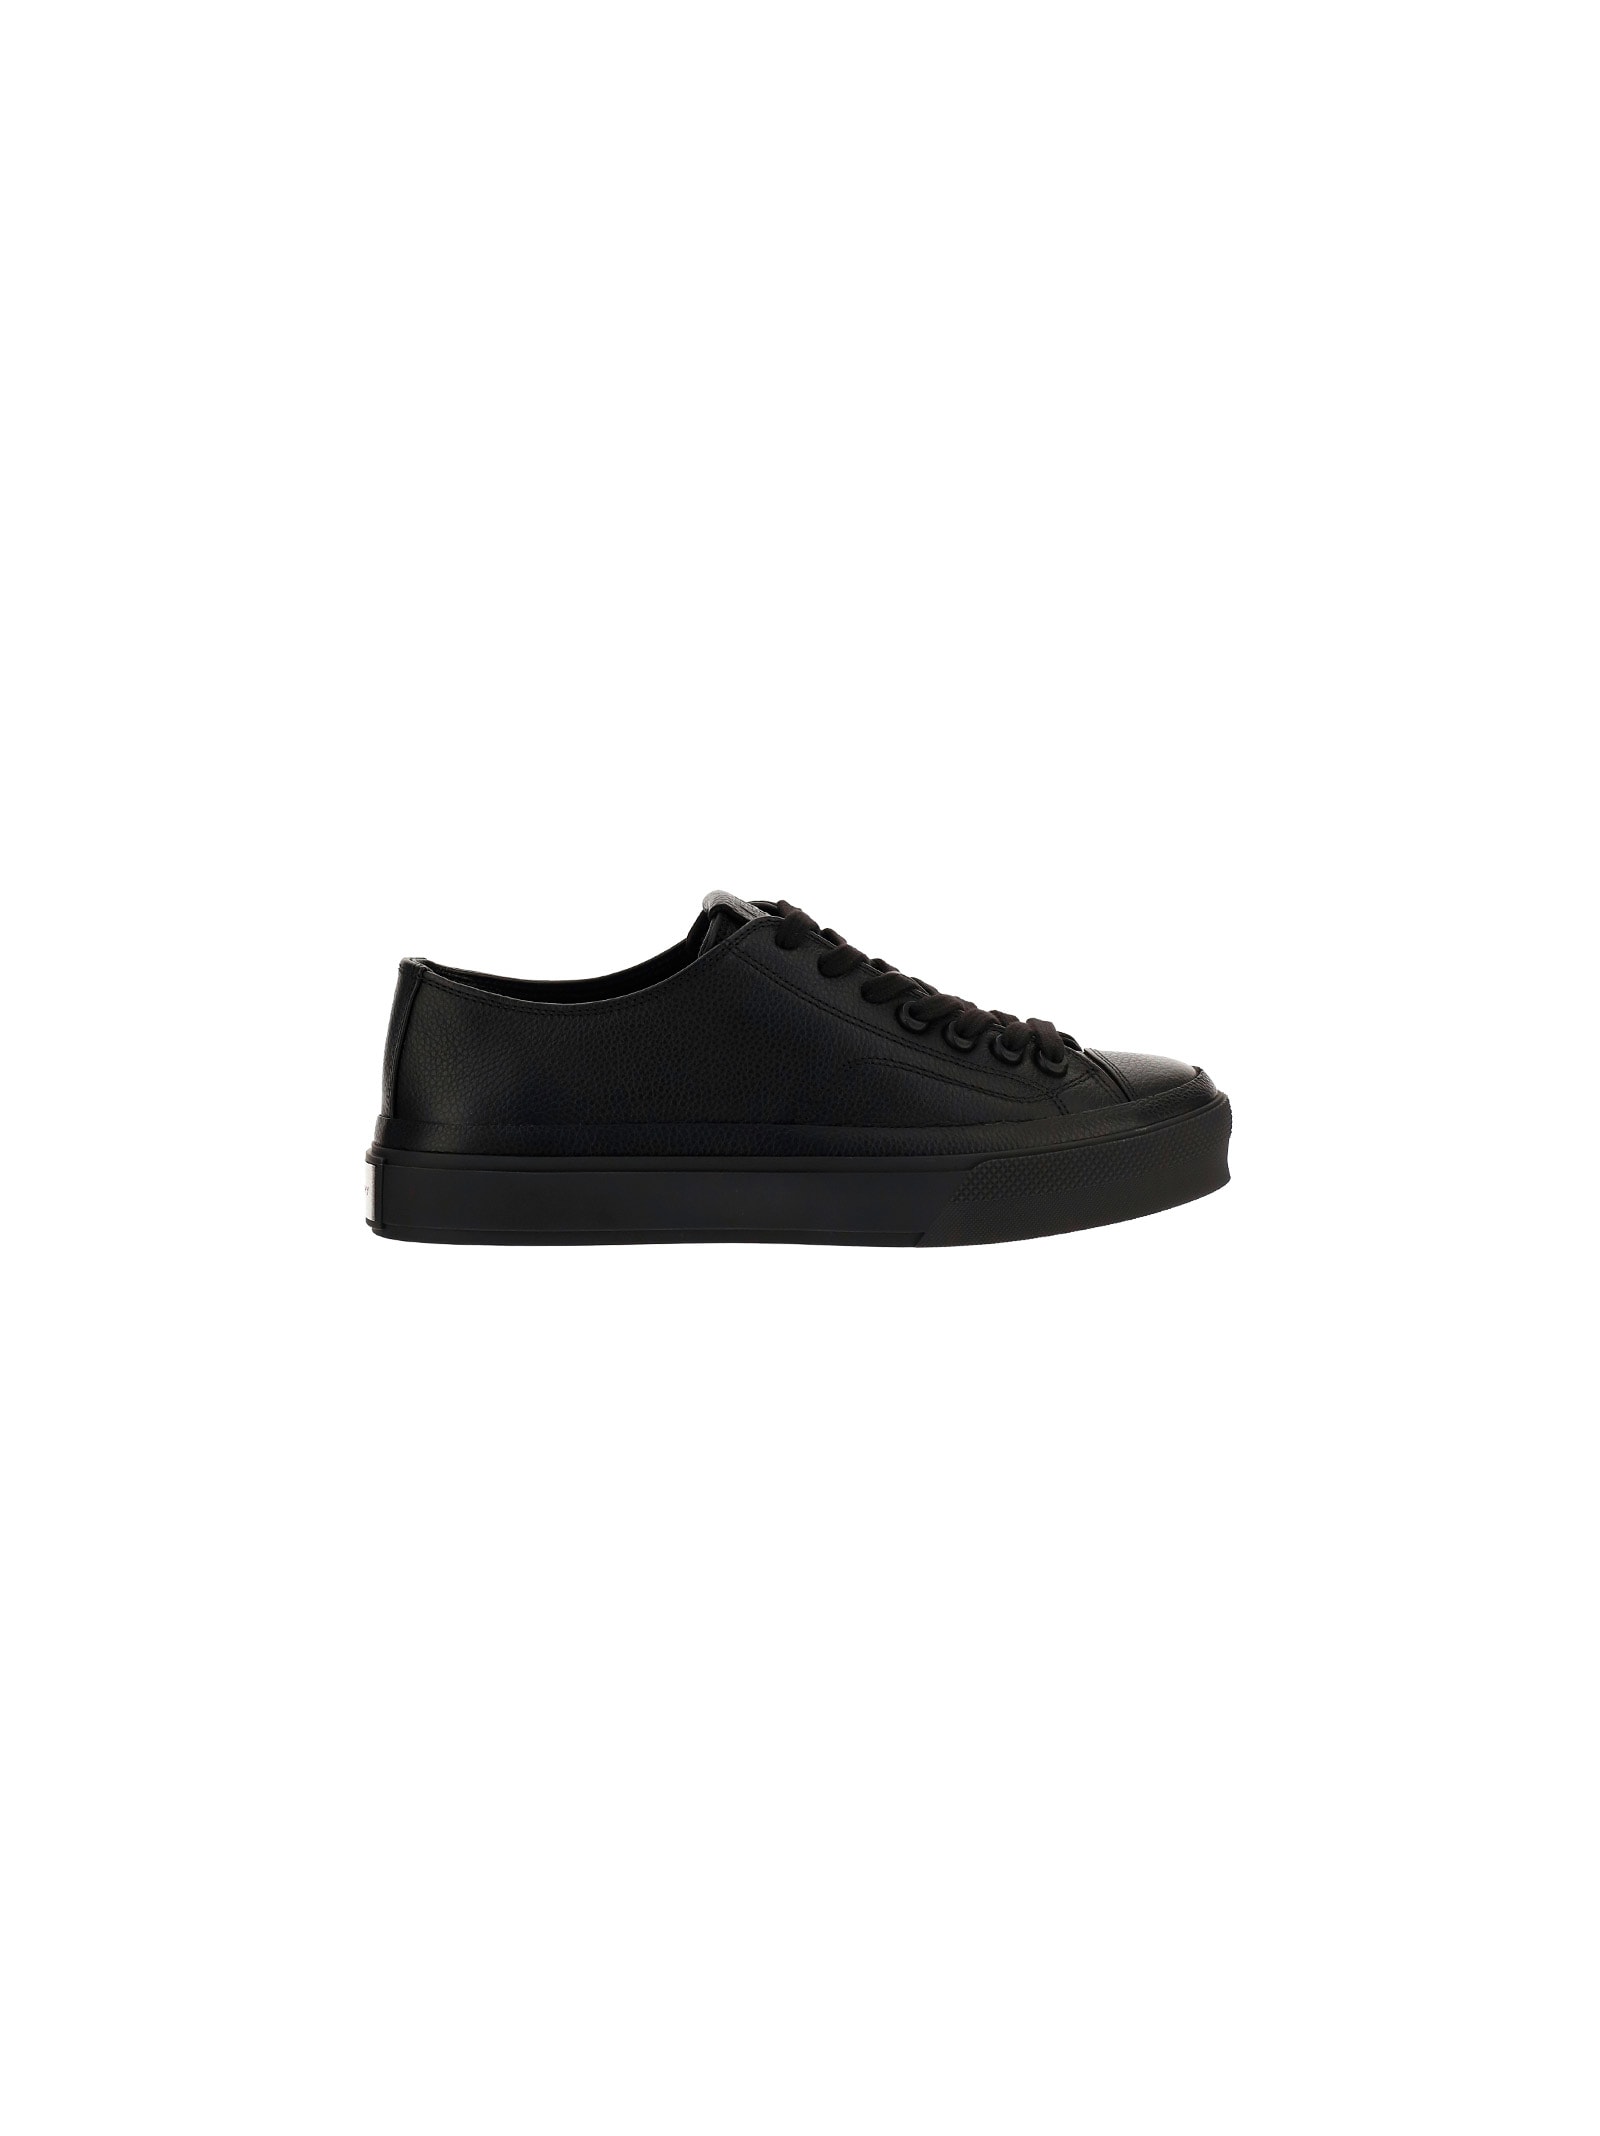 Givenchy City Low Sneakers